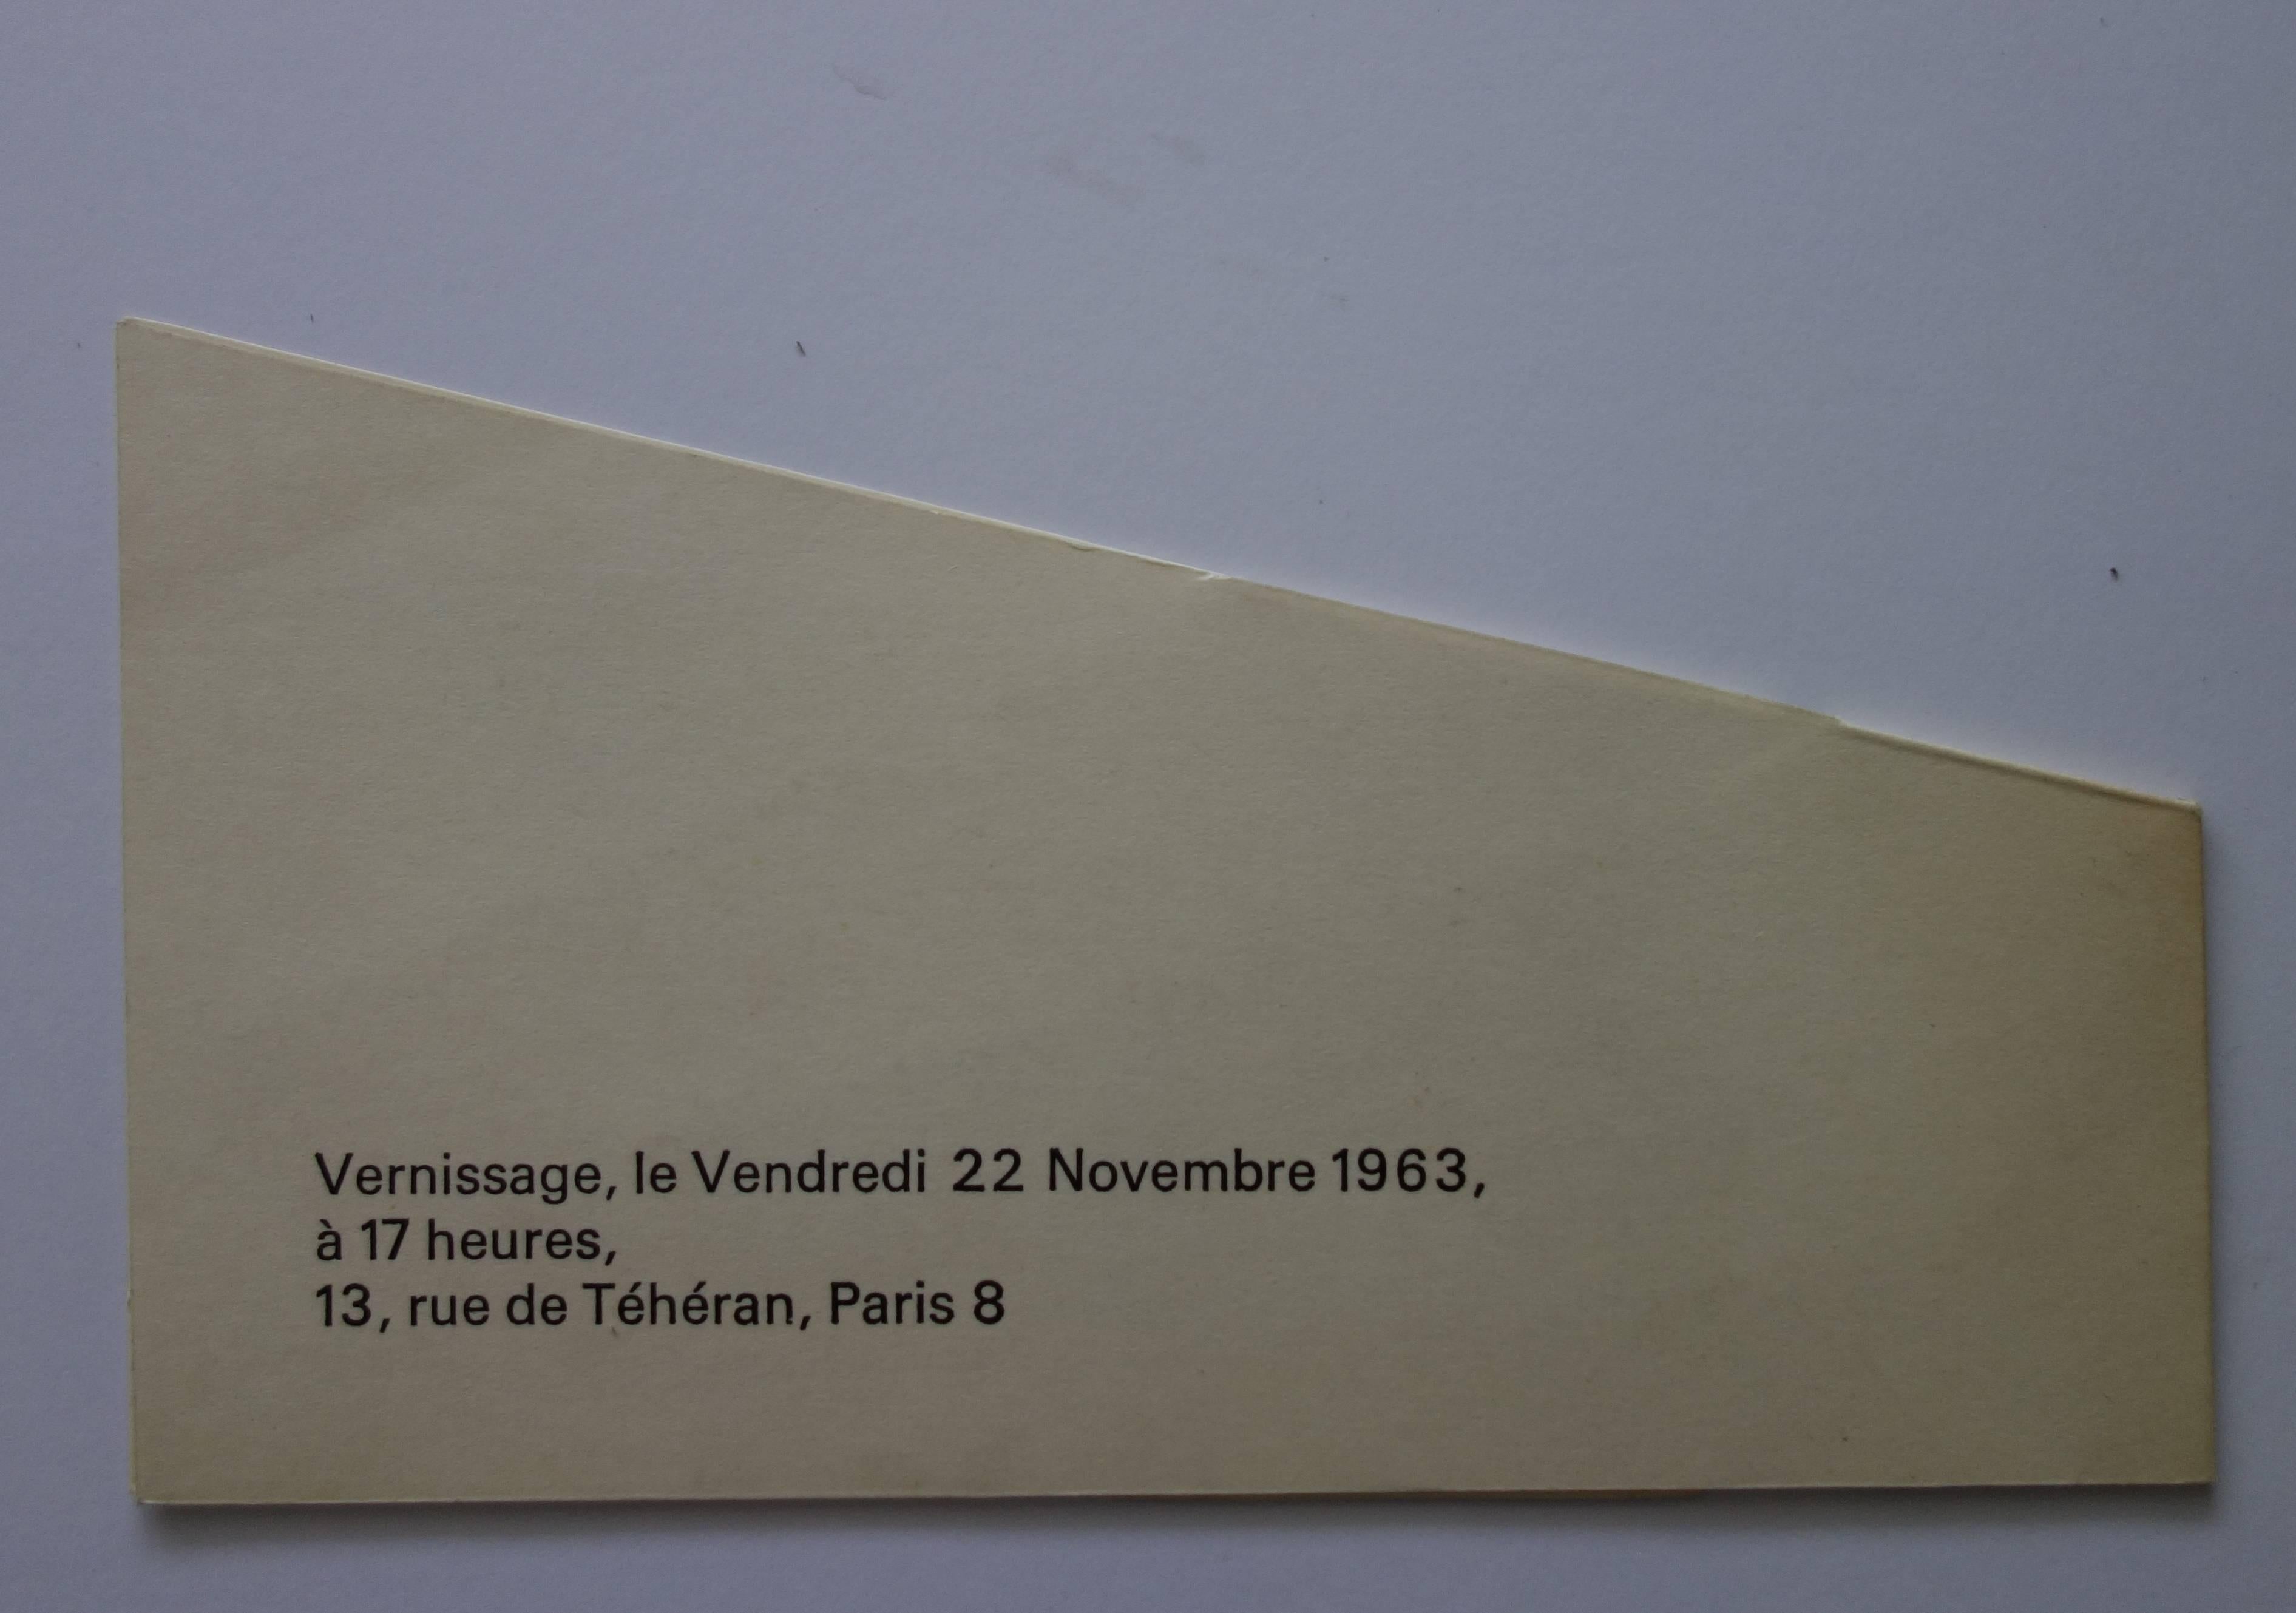 Alexander CALDER
Stabiles 

Original lithographic pop-up card 
Plate signed 
Edited by Maeght in 1963 : Very rare invitation card for the Vernissage
Open size : 15 x 33 cm (c. 6 x 13